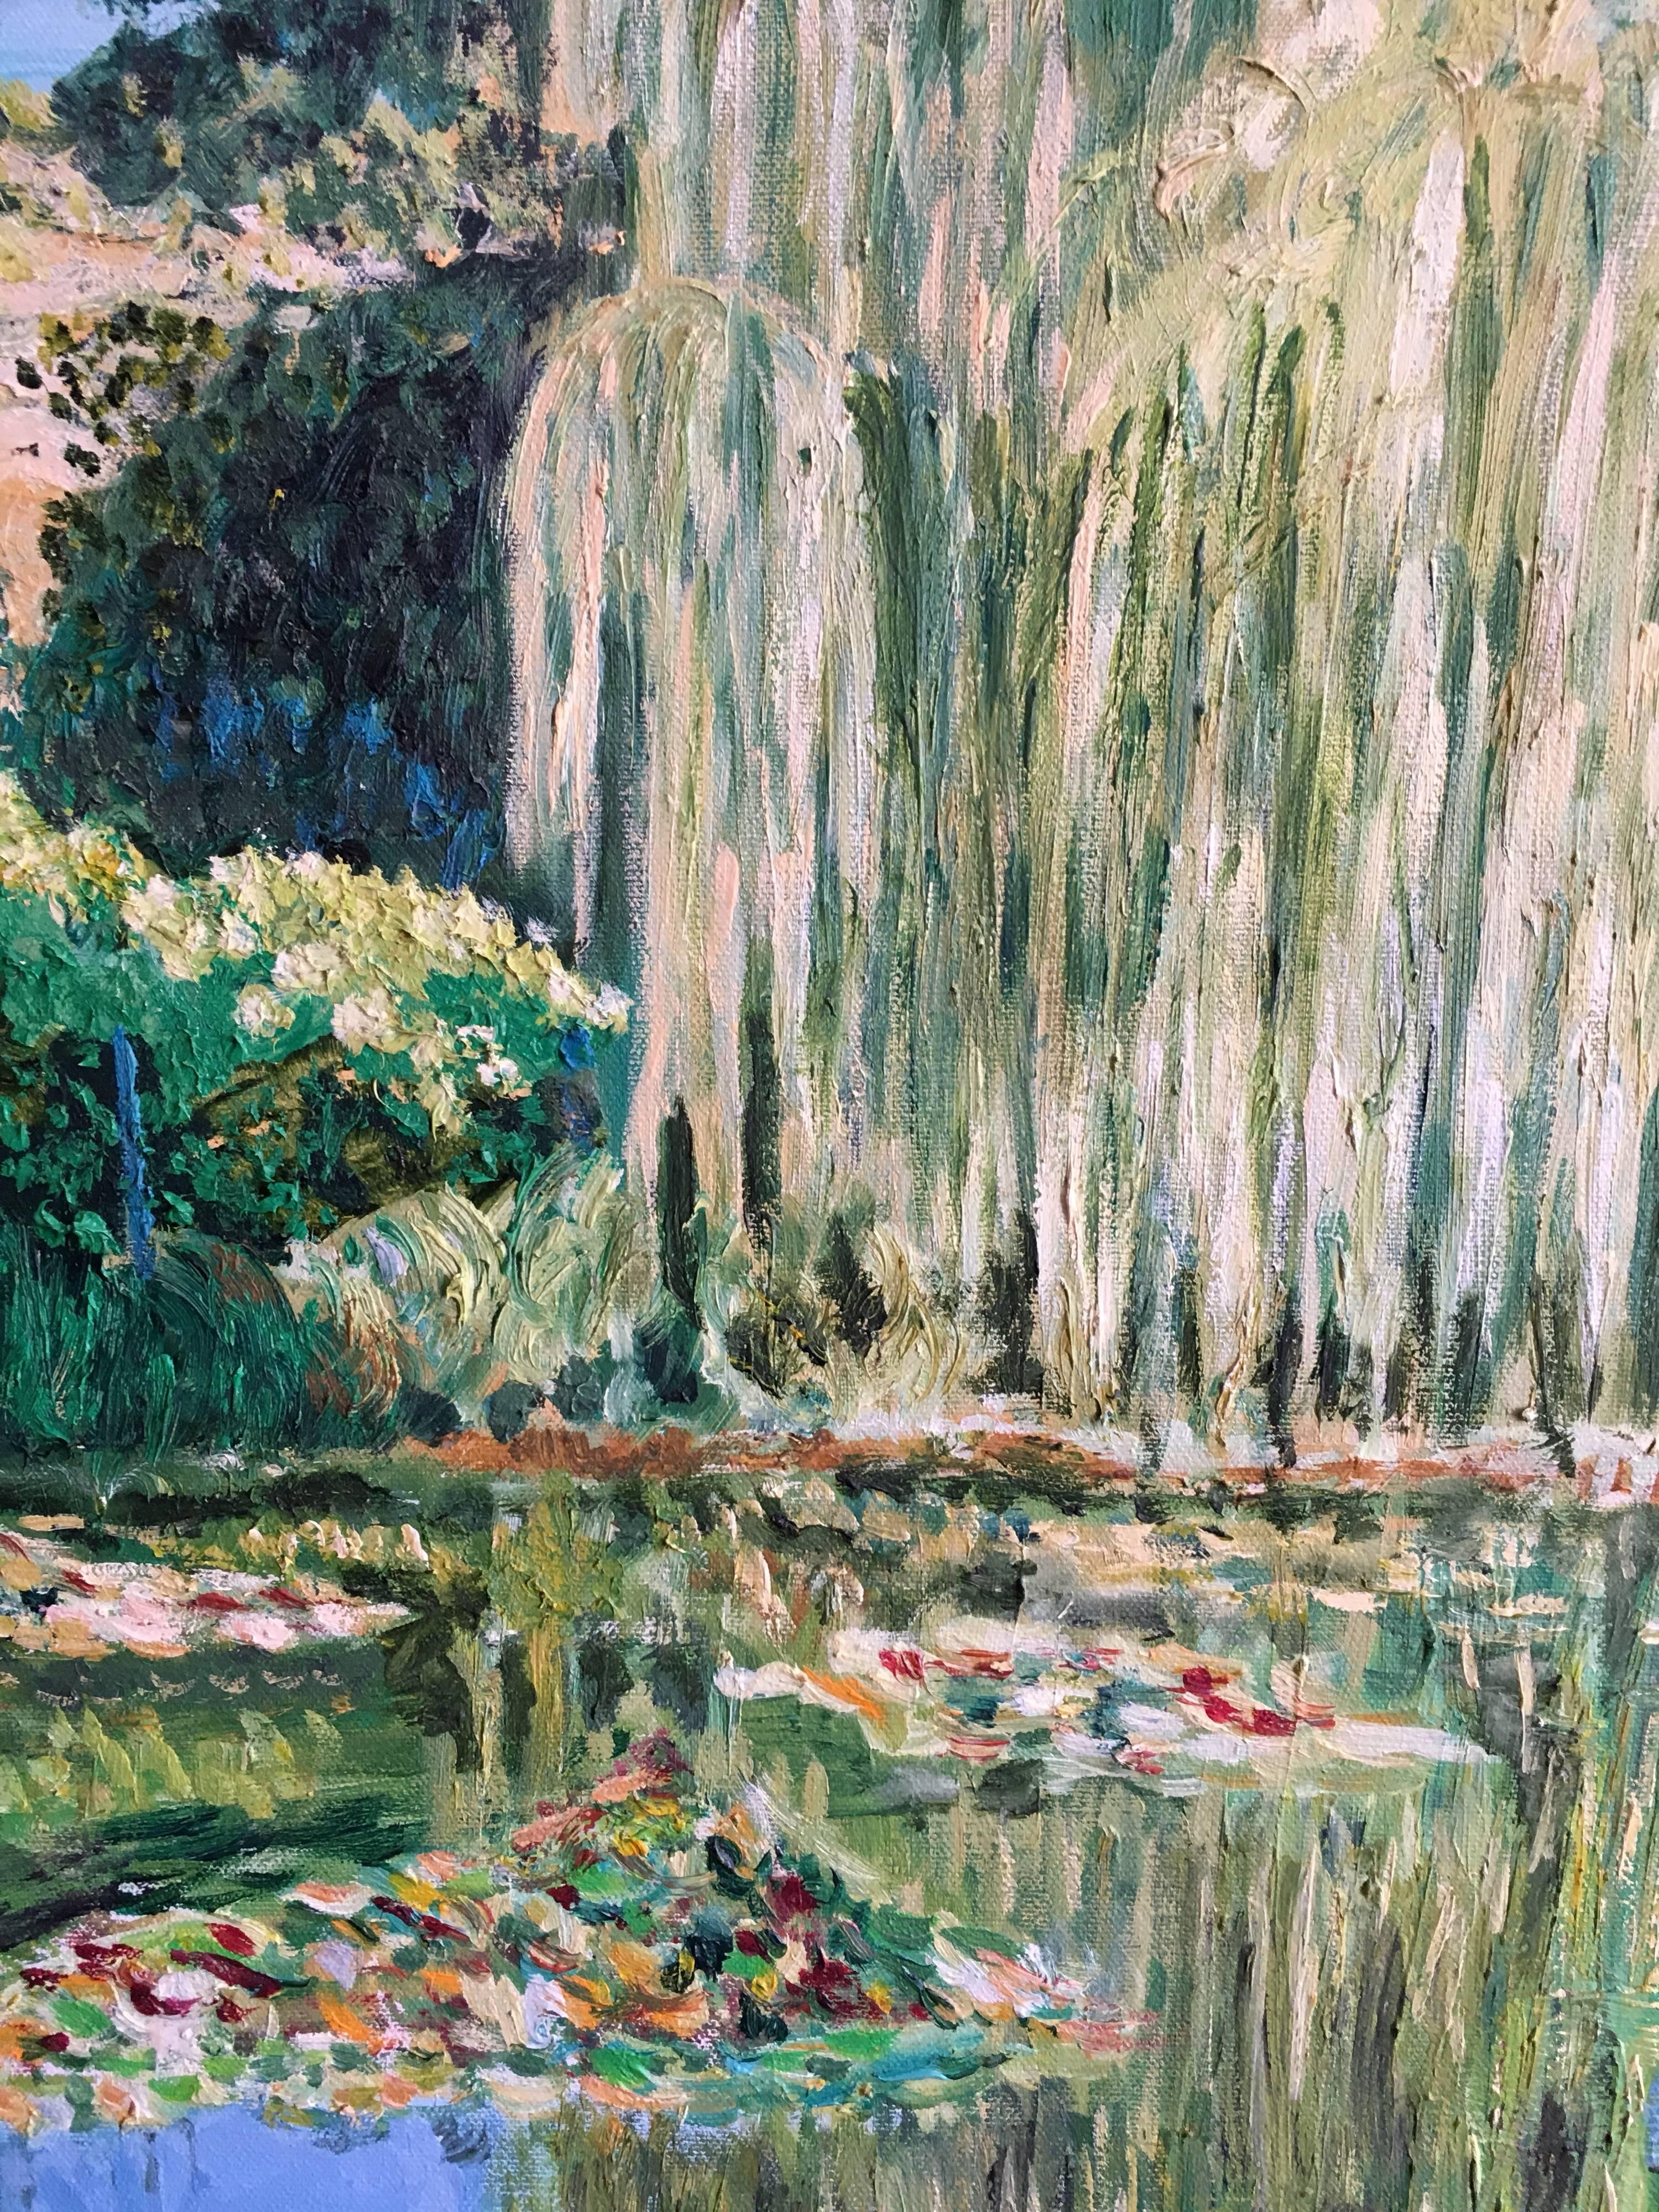 Waterlily Pond, Giverny
O.Brennan, 20th Century
Signed by the artist on the lower left hand corner
Oil painting on canvas, unframed
Canvas size: 24 x 30 inches

Wonderful impressionist oil of a lovey scene. This lovely interpretation of the famous